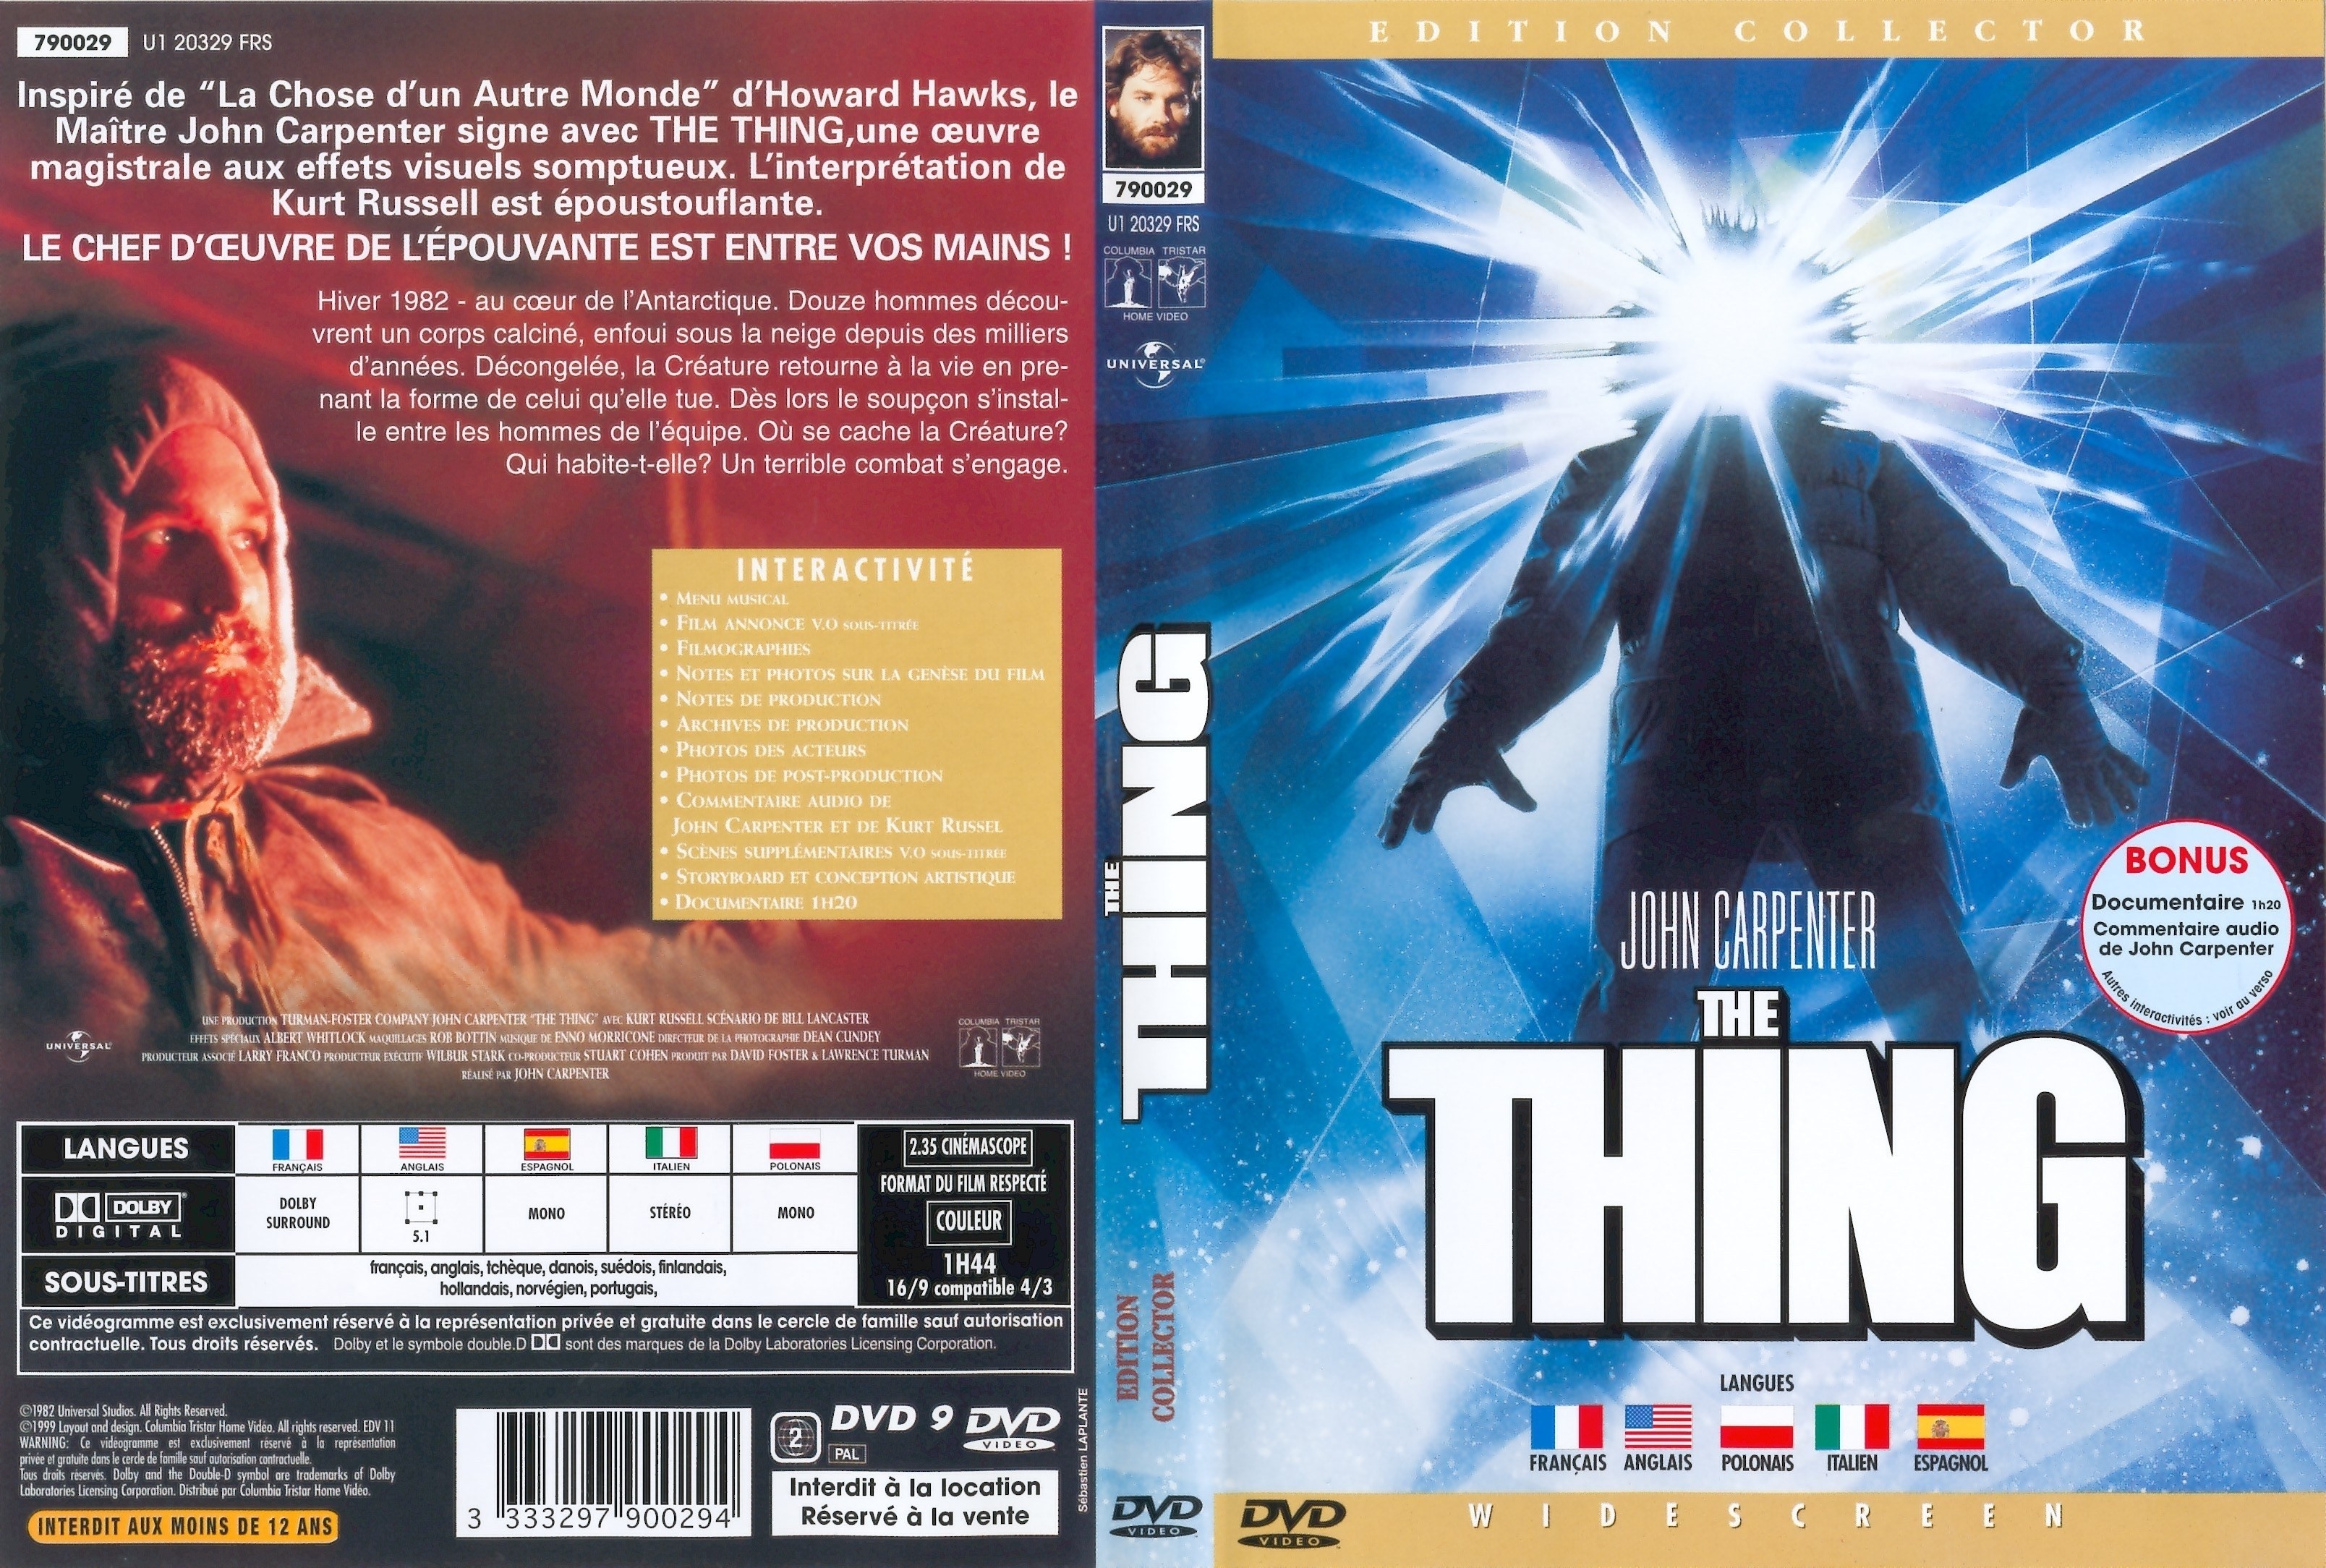 Jaquette DVD The thing